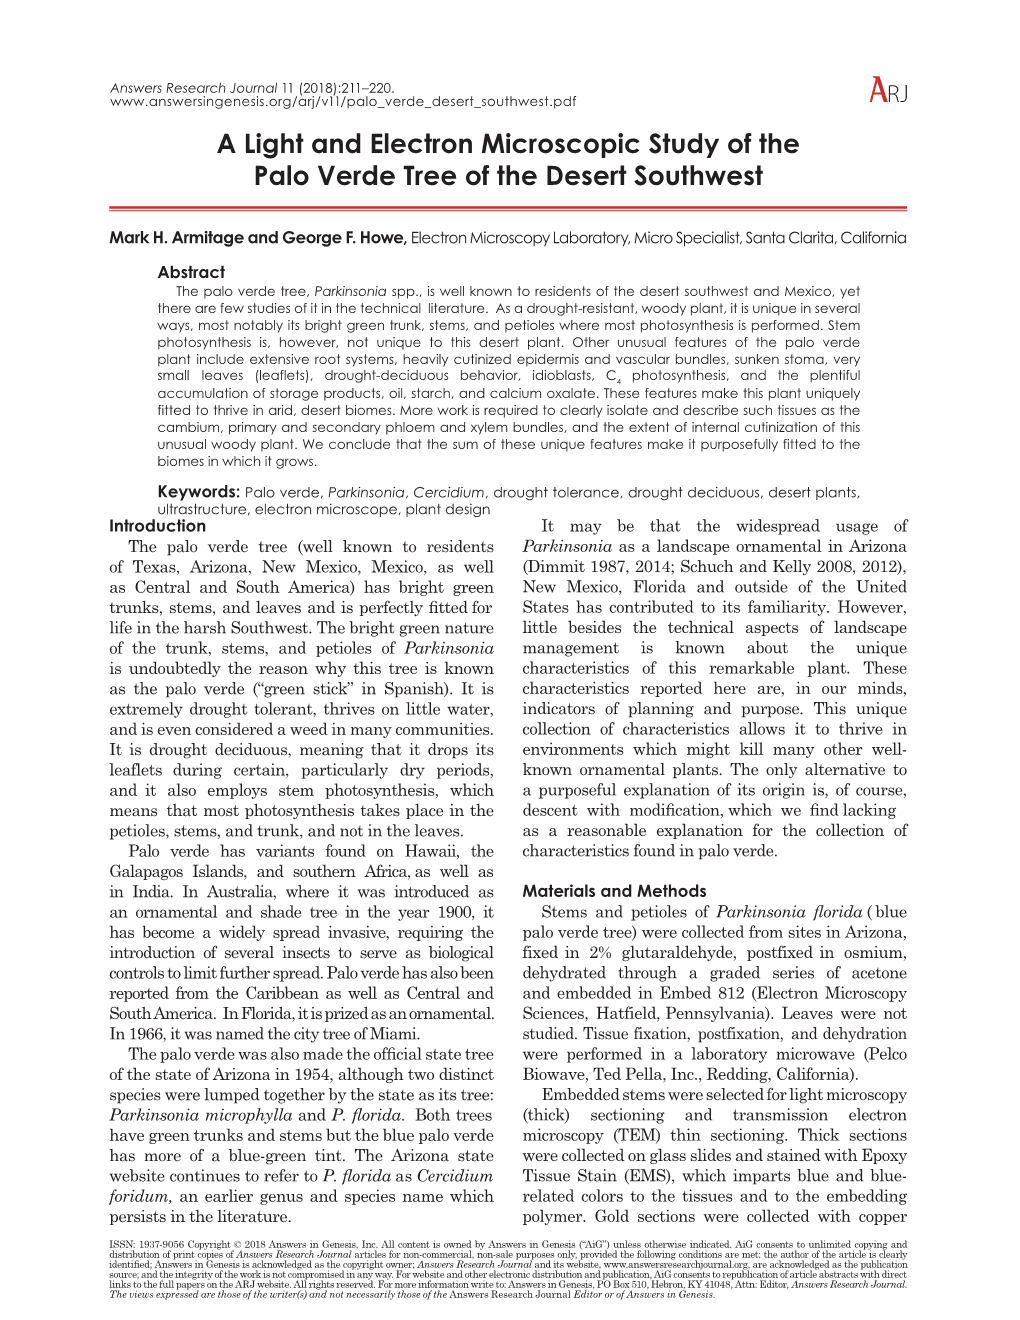 A Light and Electron Microscopic Study of the Palo Verde Tree of the Desert Southwest